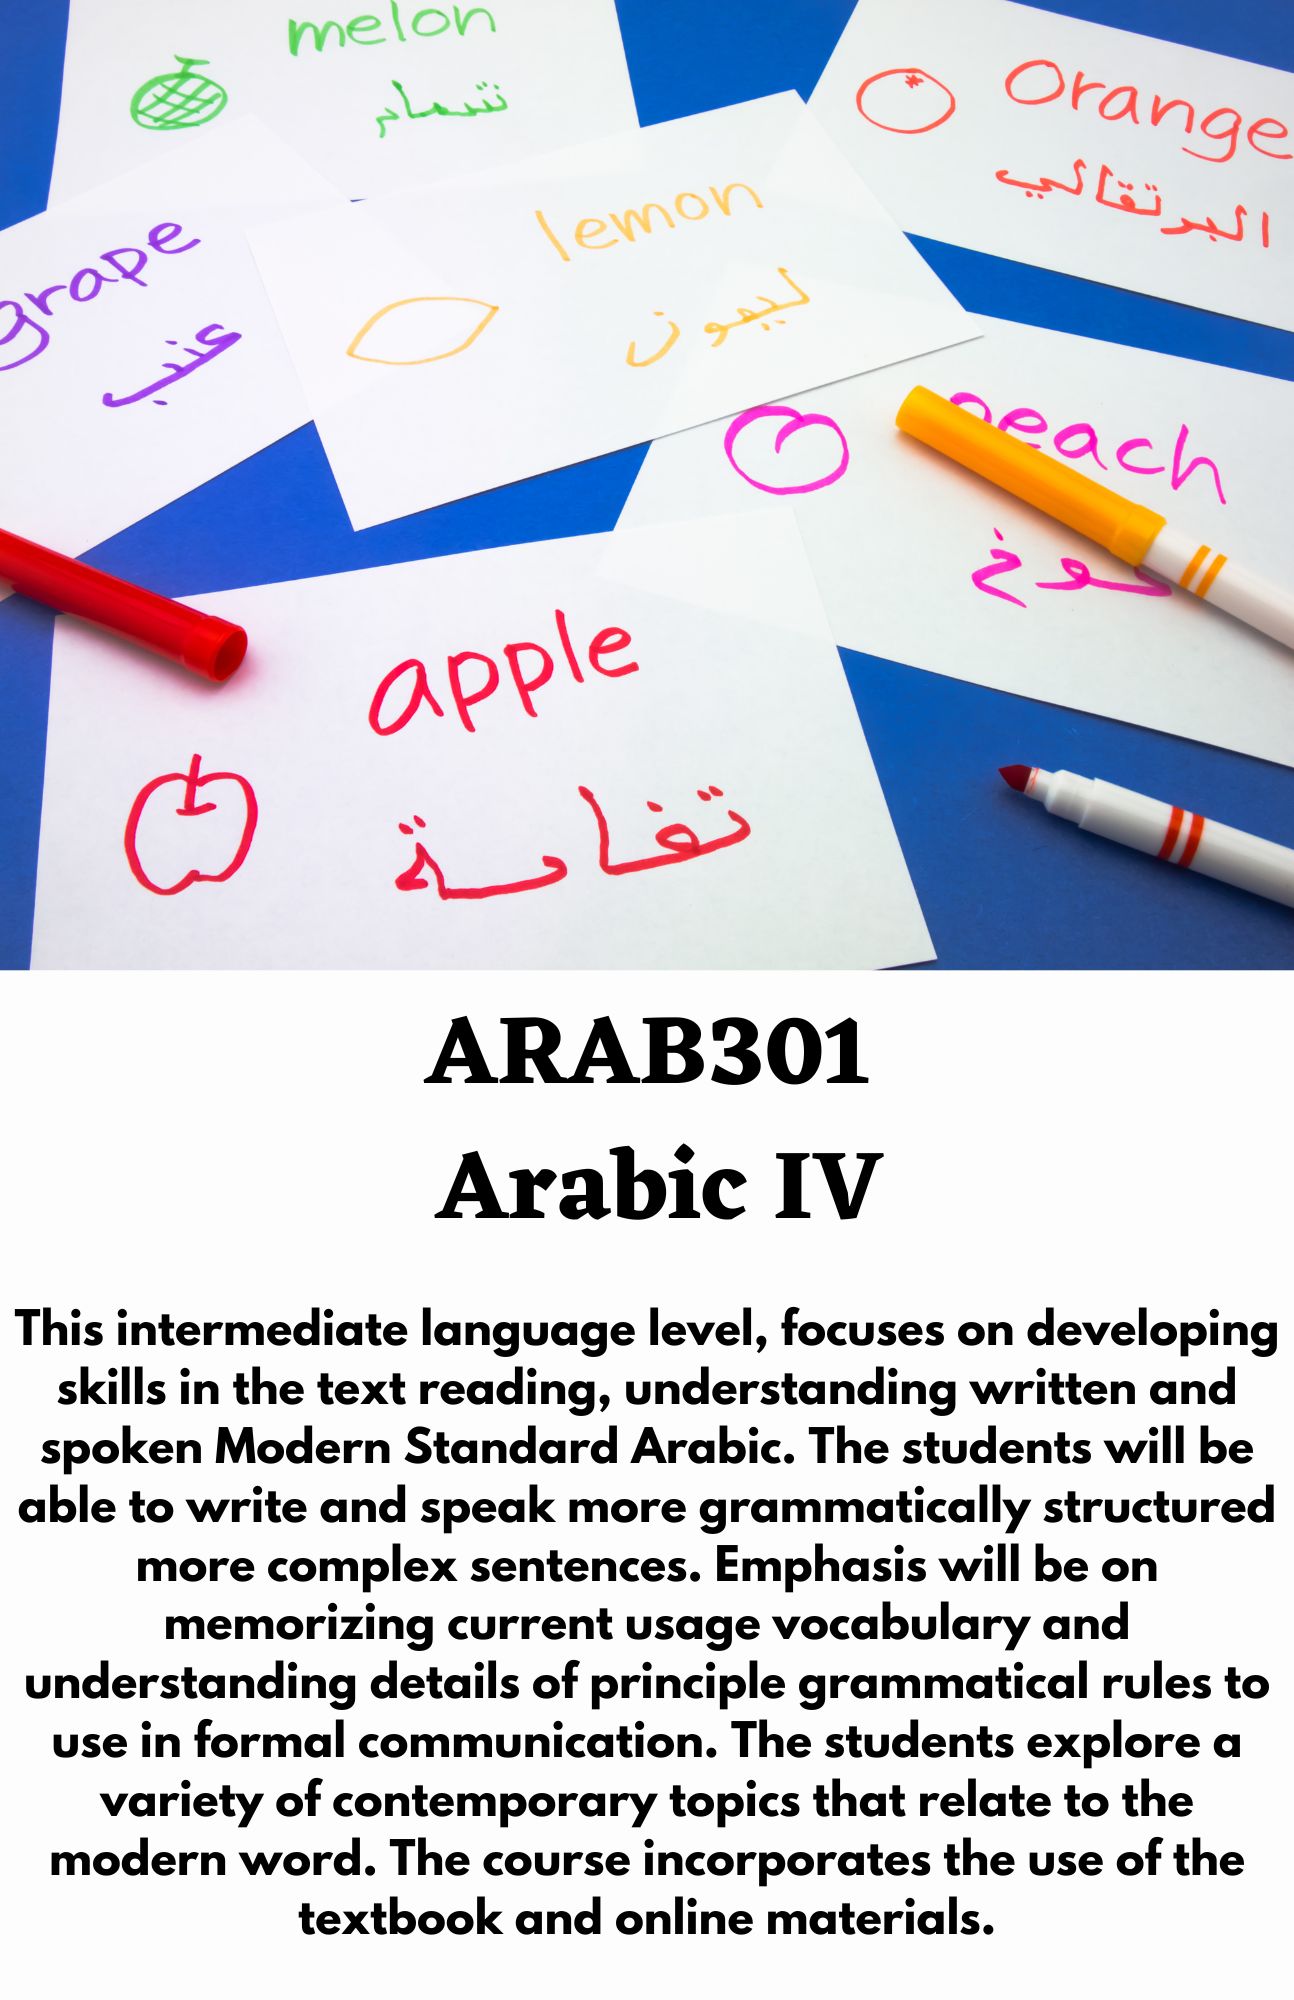 ARAB301  Arabic IV. This intermediate language level, focuses on developing skills in the text reading, understanding written and spoken Modern Standard Arabic. The students will be able to write and speak more grammatically structured more complex sentences. Emphasis will be on memorizing current usage vocabulary and understanding details of principle grammatical rules to use in formal communication. The students explore a variety of contemporary topics that relate to the modern word. The course incorporates the use of the textbook and online materials.